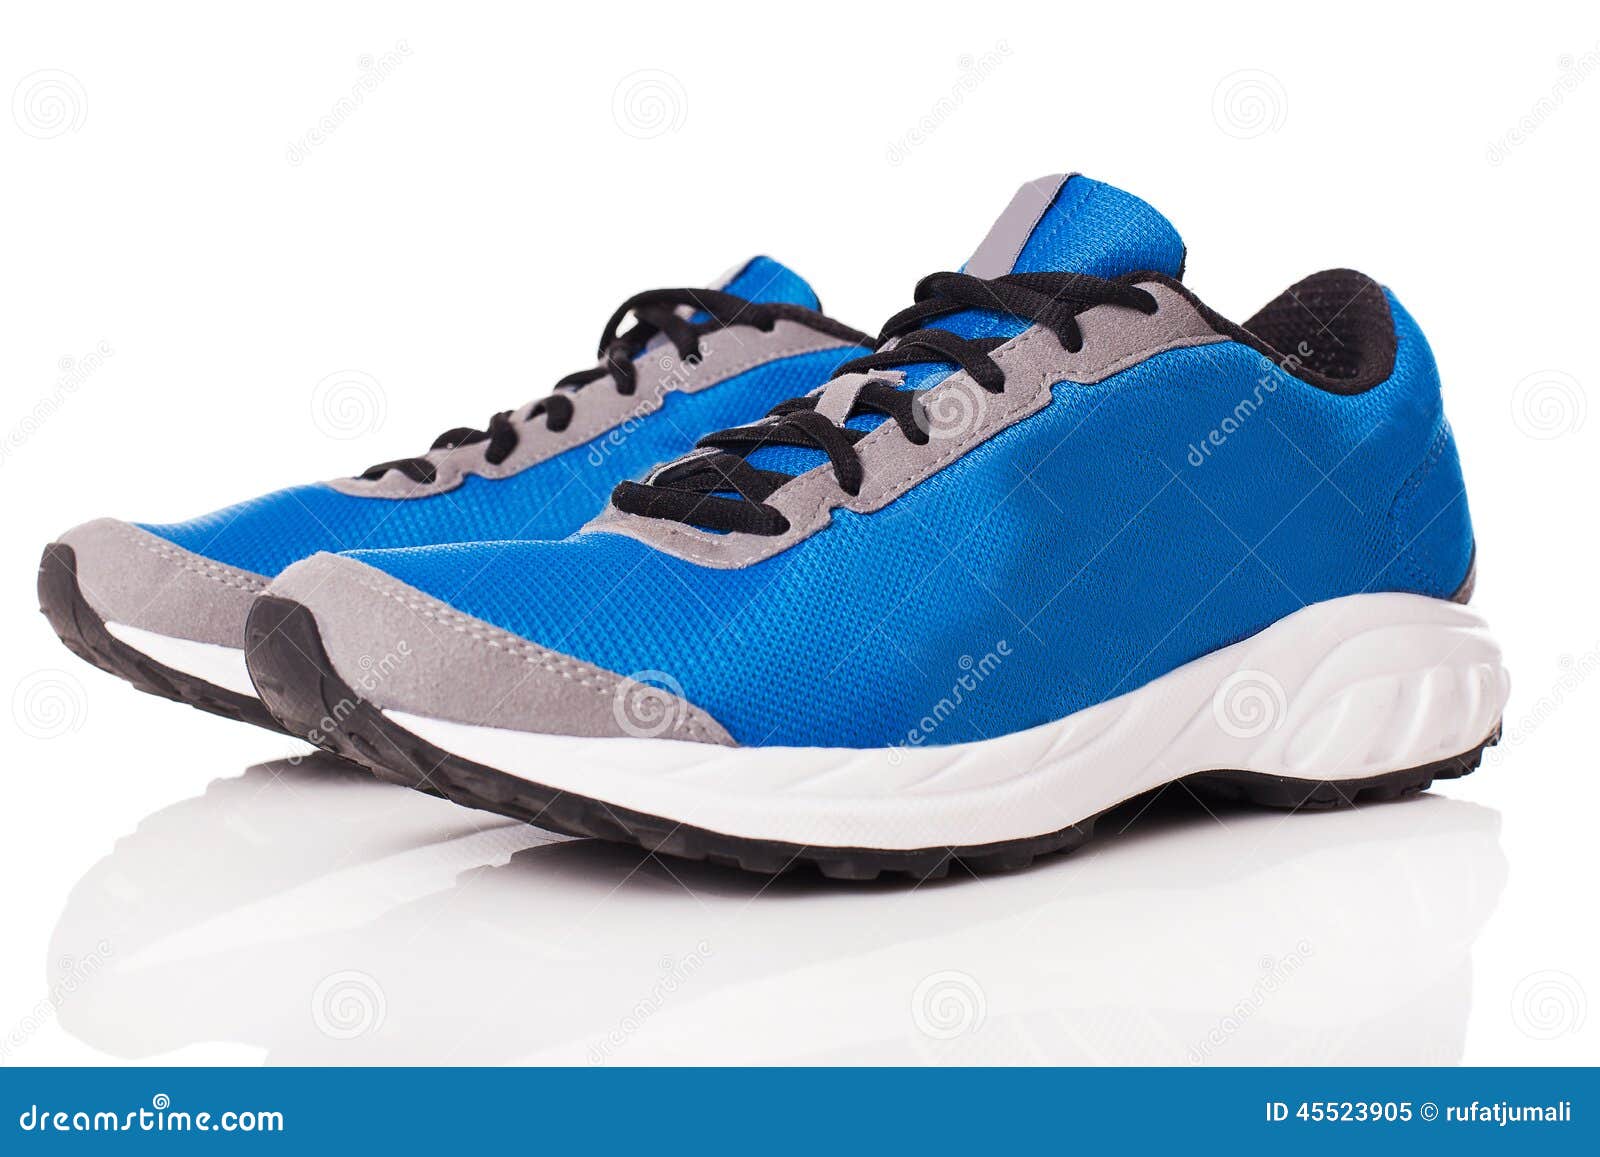 A Pair Of Trainers Stock Photo - Image: 45523905